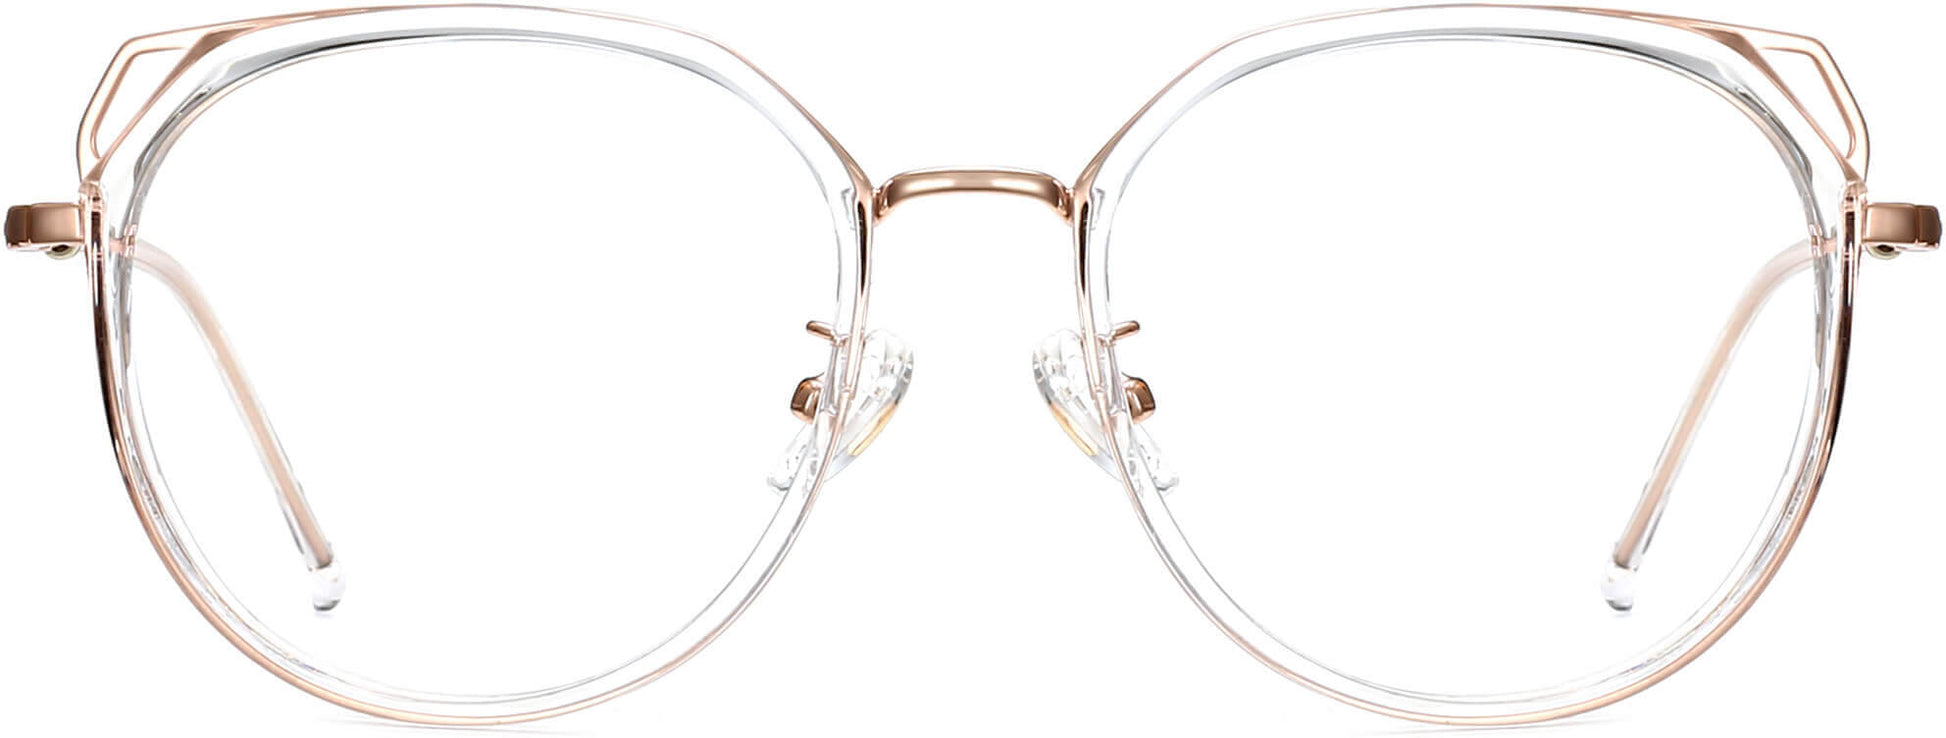 Cynthia Cateye Clear Eyeglasses from ANRRI, front view